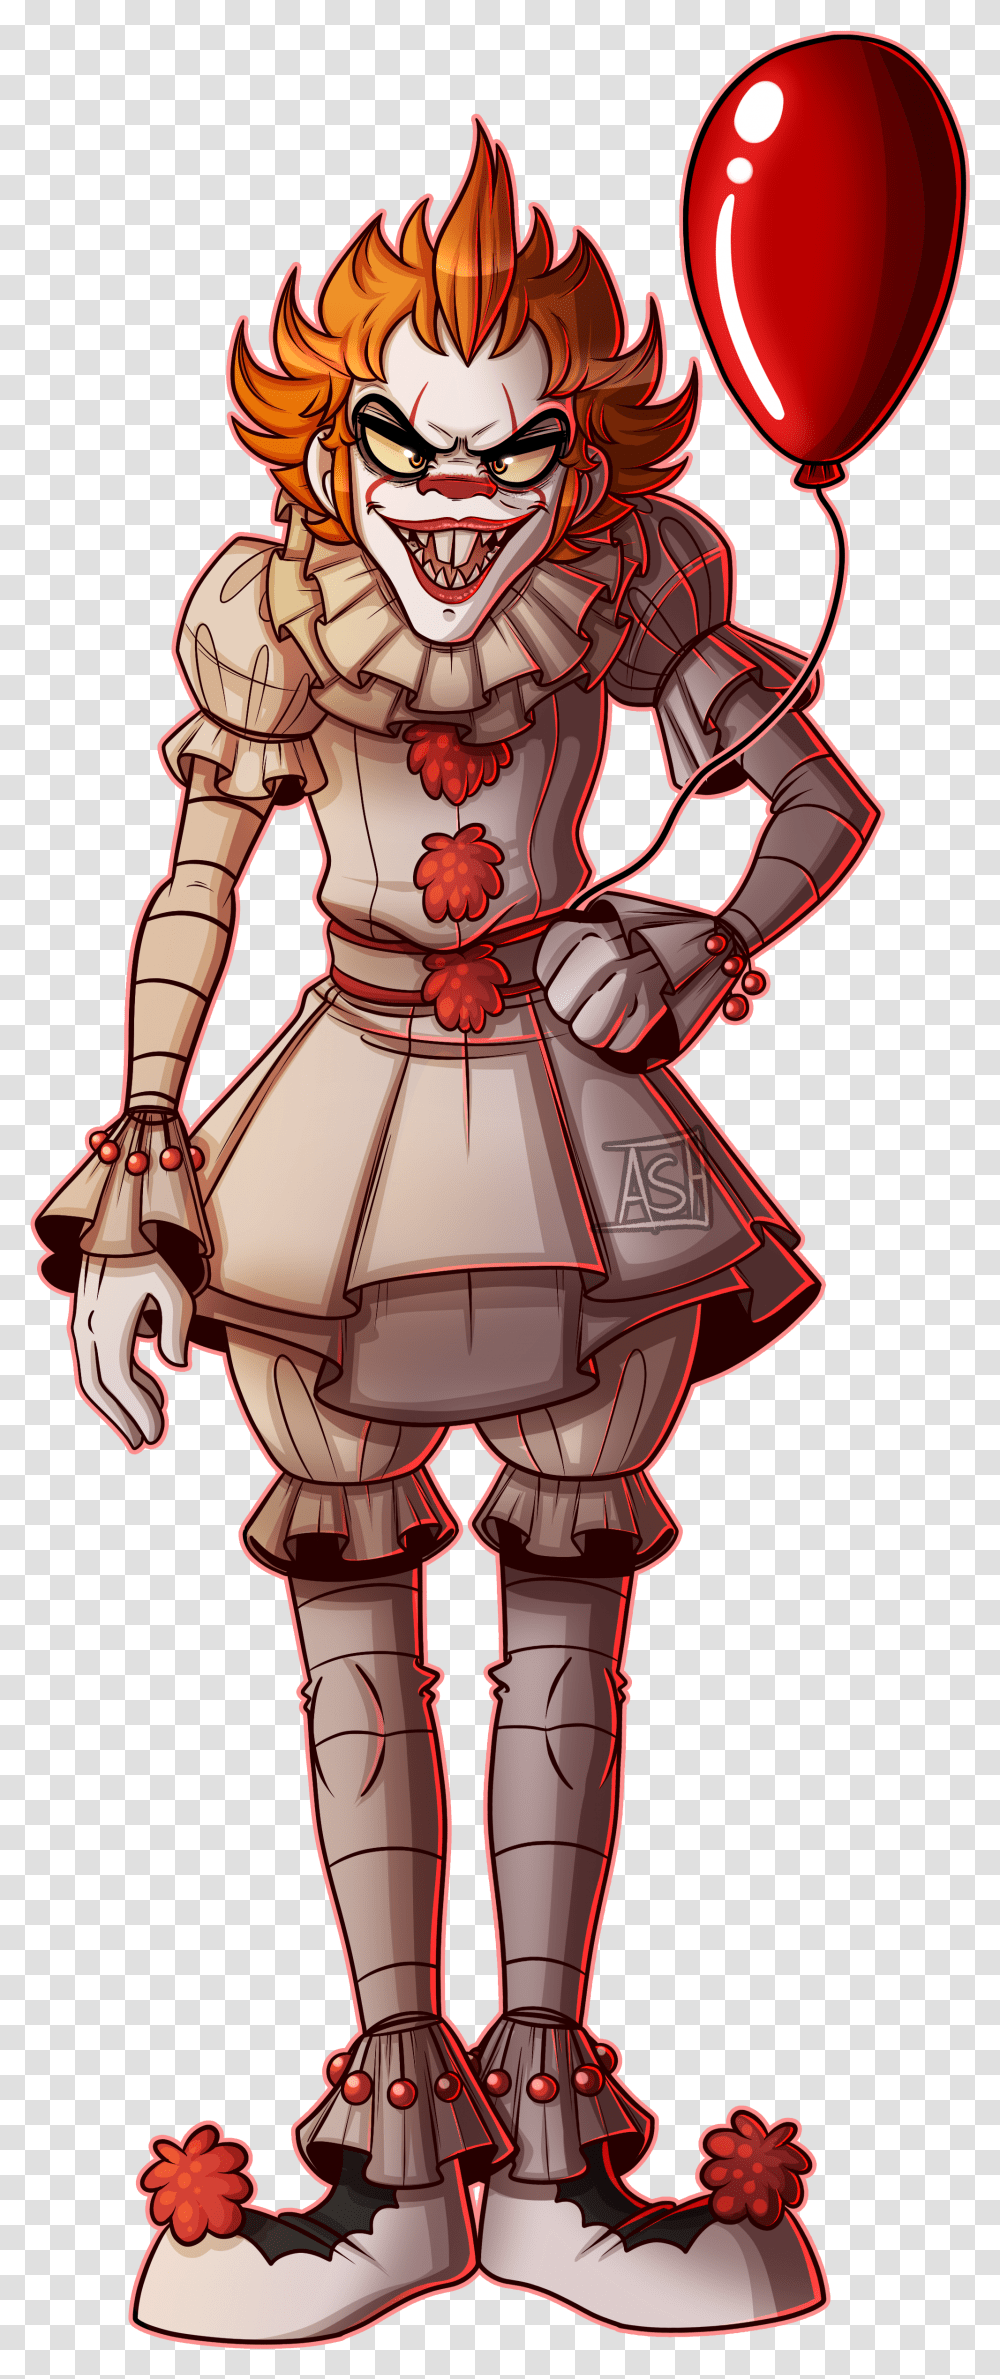 It Clown Cartoon Legendary Creature Pennywise Cartoon, Armor, Person, Human, Knight Transparent Png